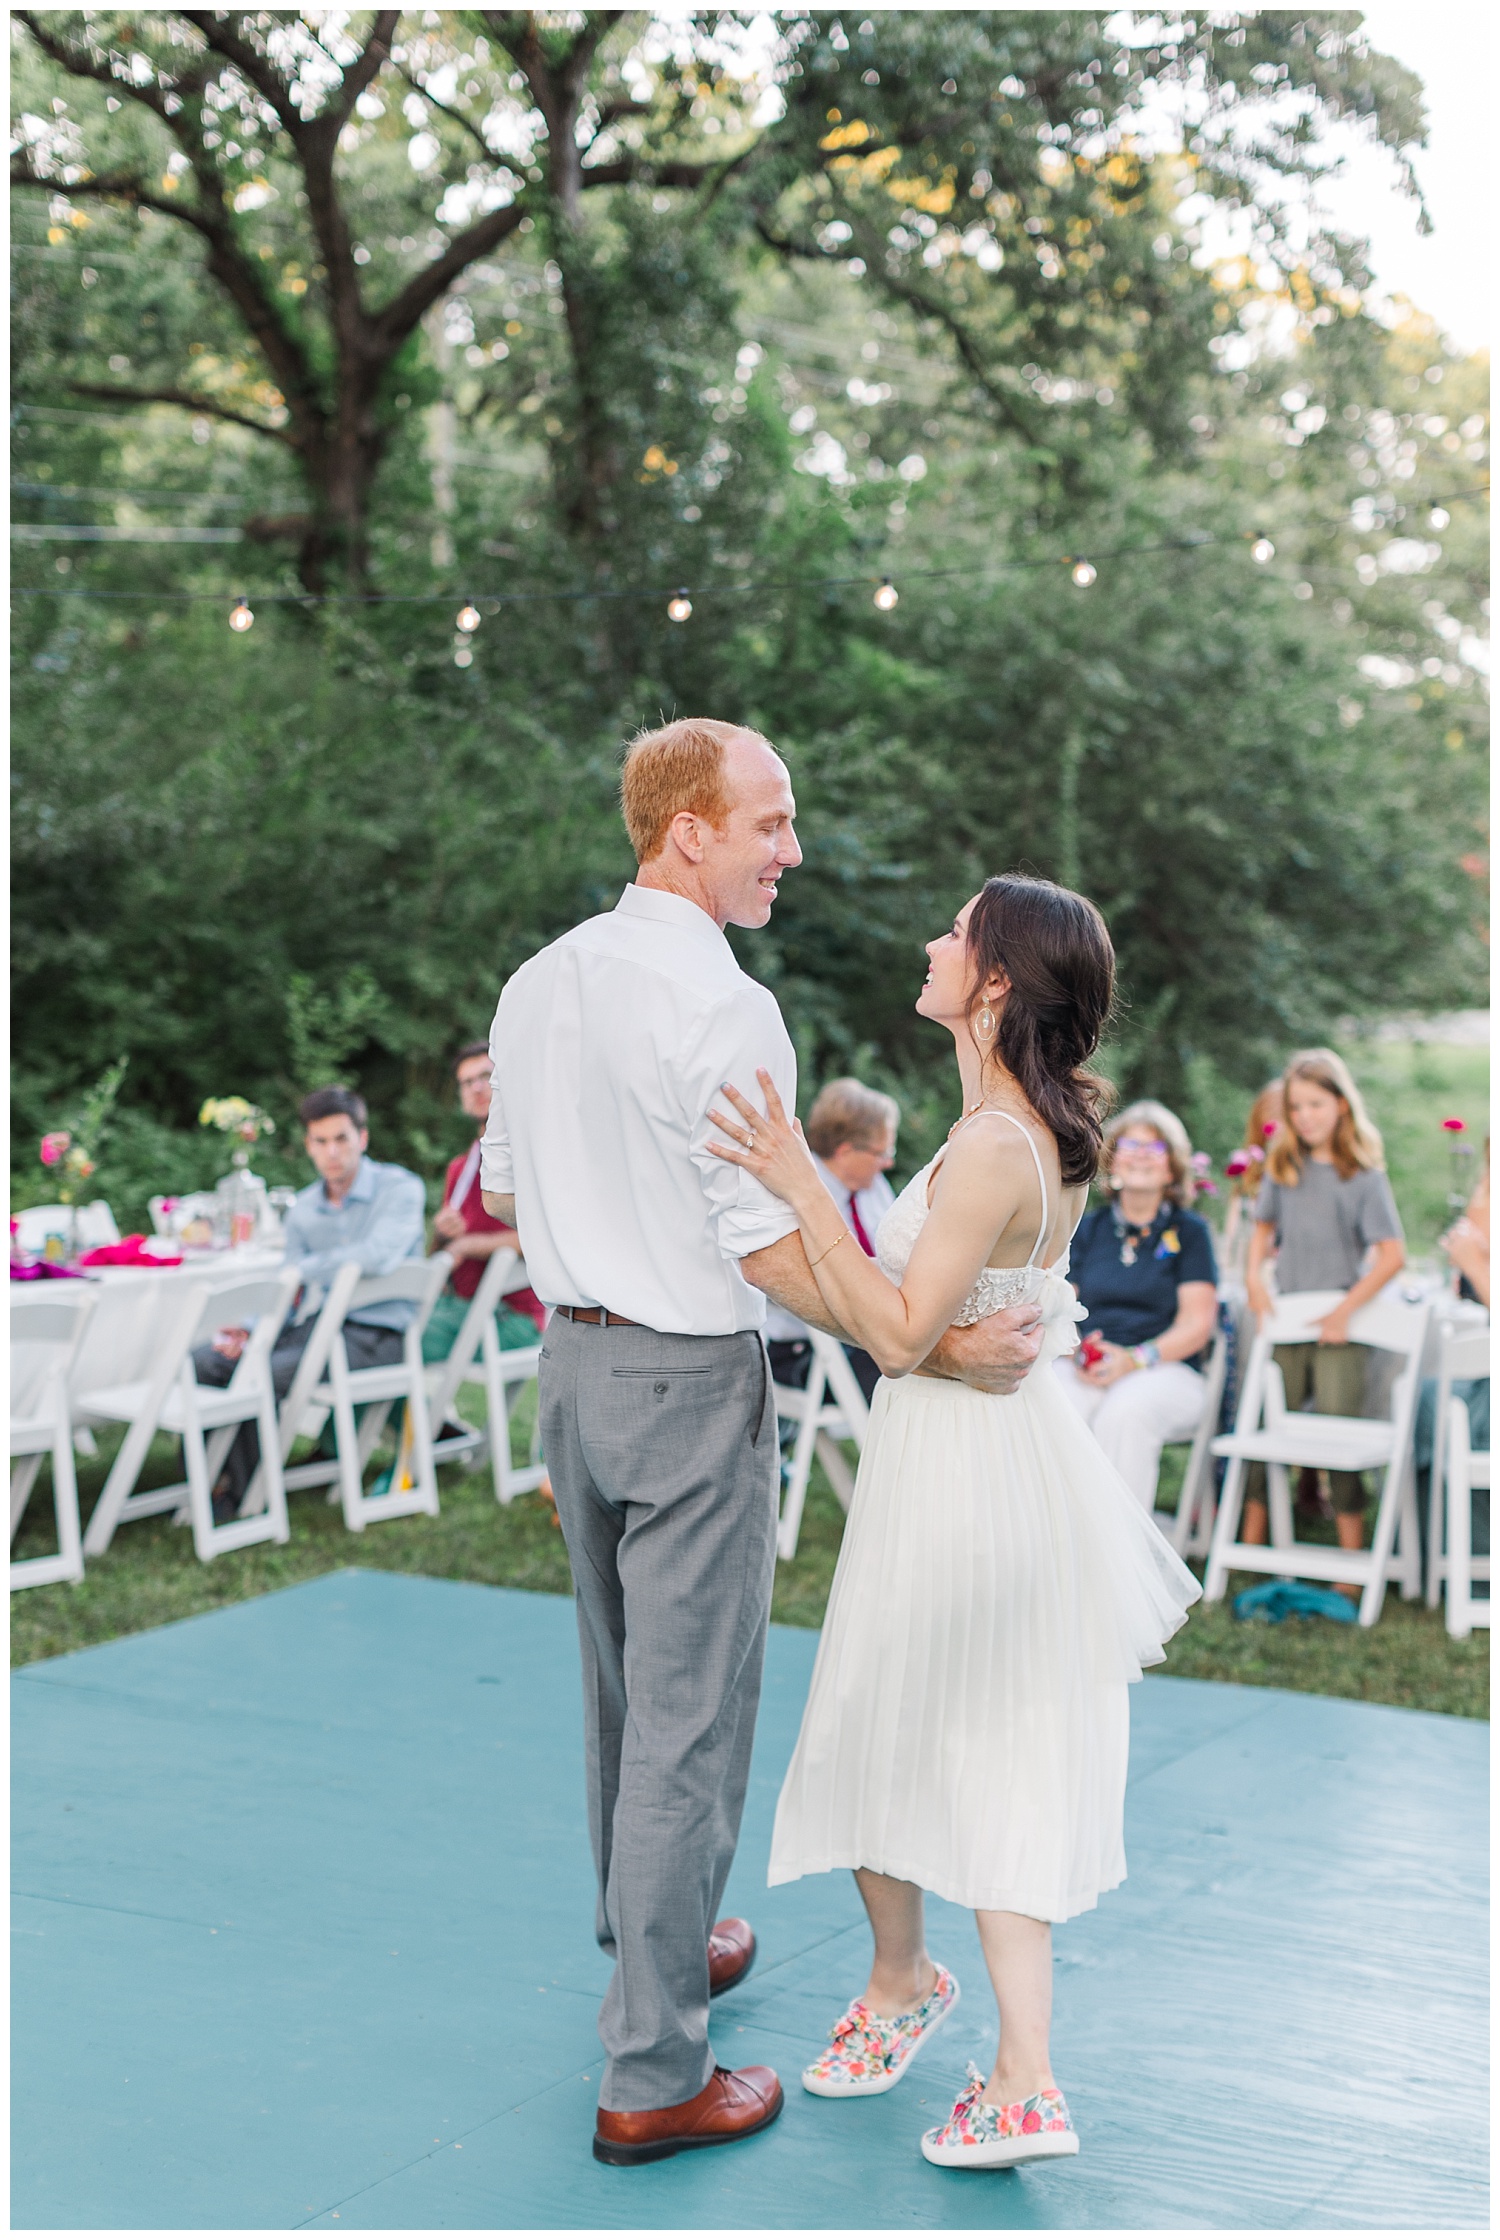 bride and groom's first dance at outdoor wedding reception